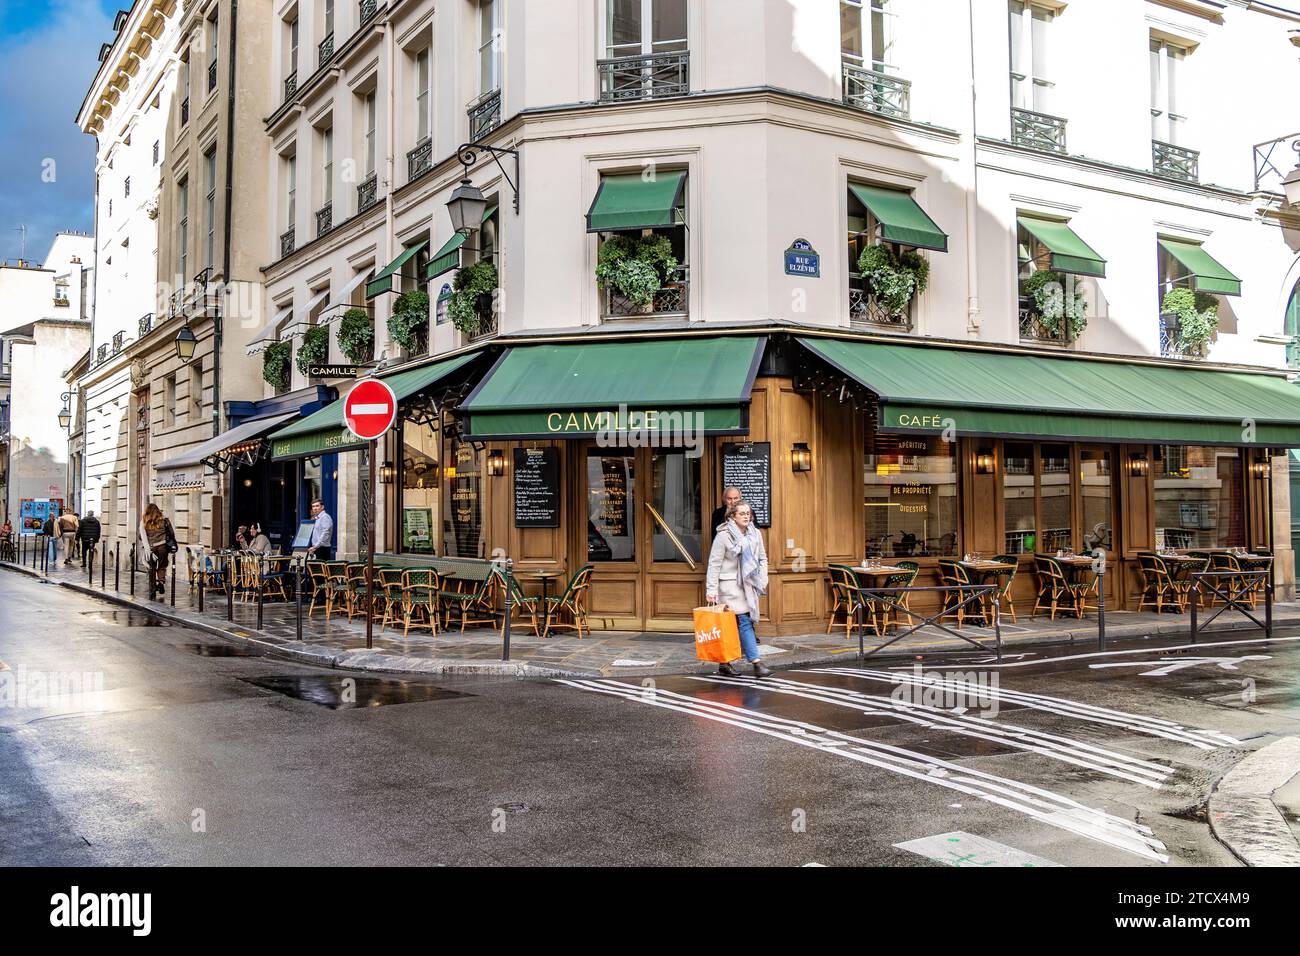 Camille, a bistro , restaurant on Rue des Francs Bourgeois in The Marais district of Paris, France Stock Photo